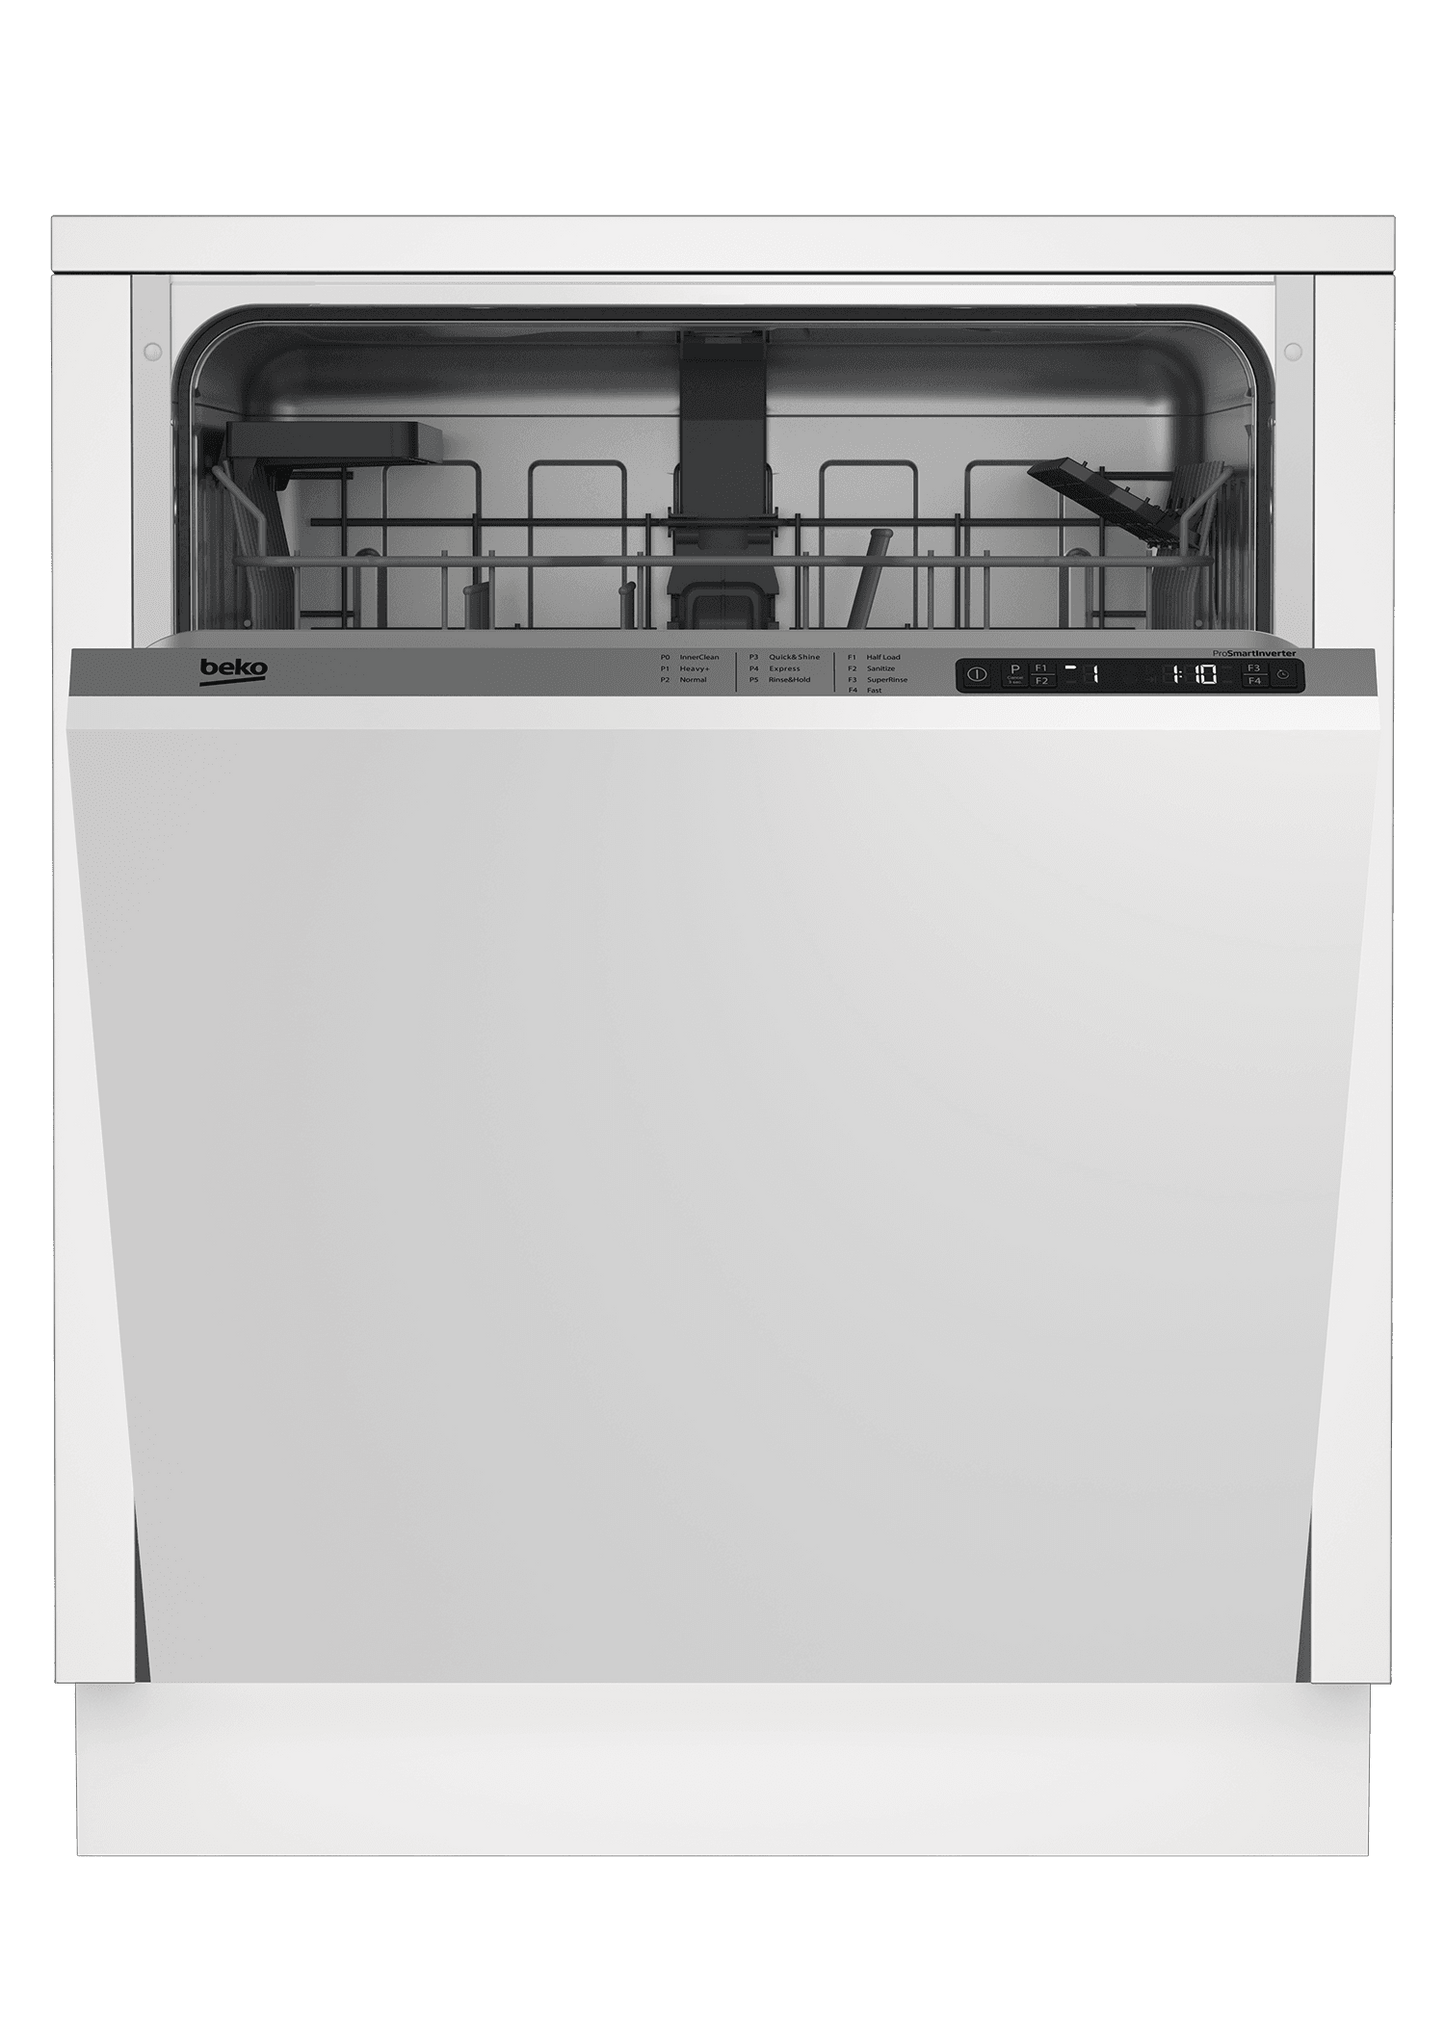 Beko DIN25401 Full Size Dishwasher, 14 Place Settings, 48 Dba, Fully Integrated Panel Ready